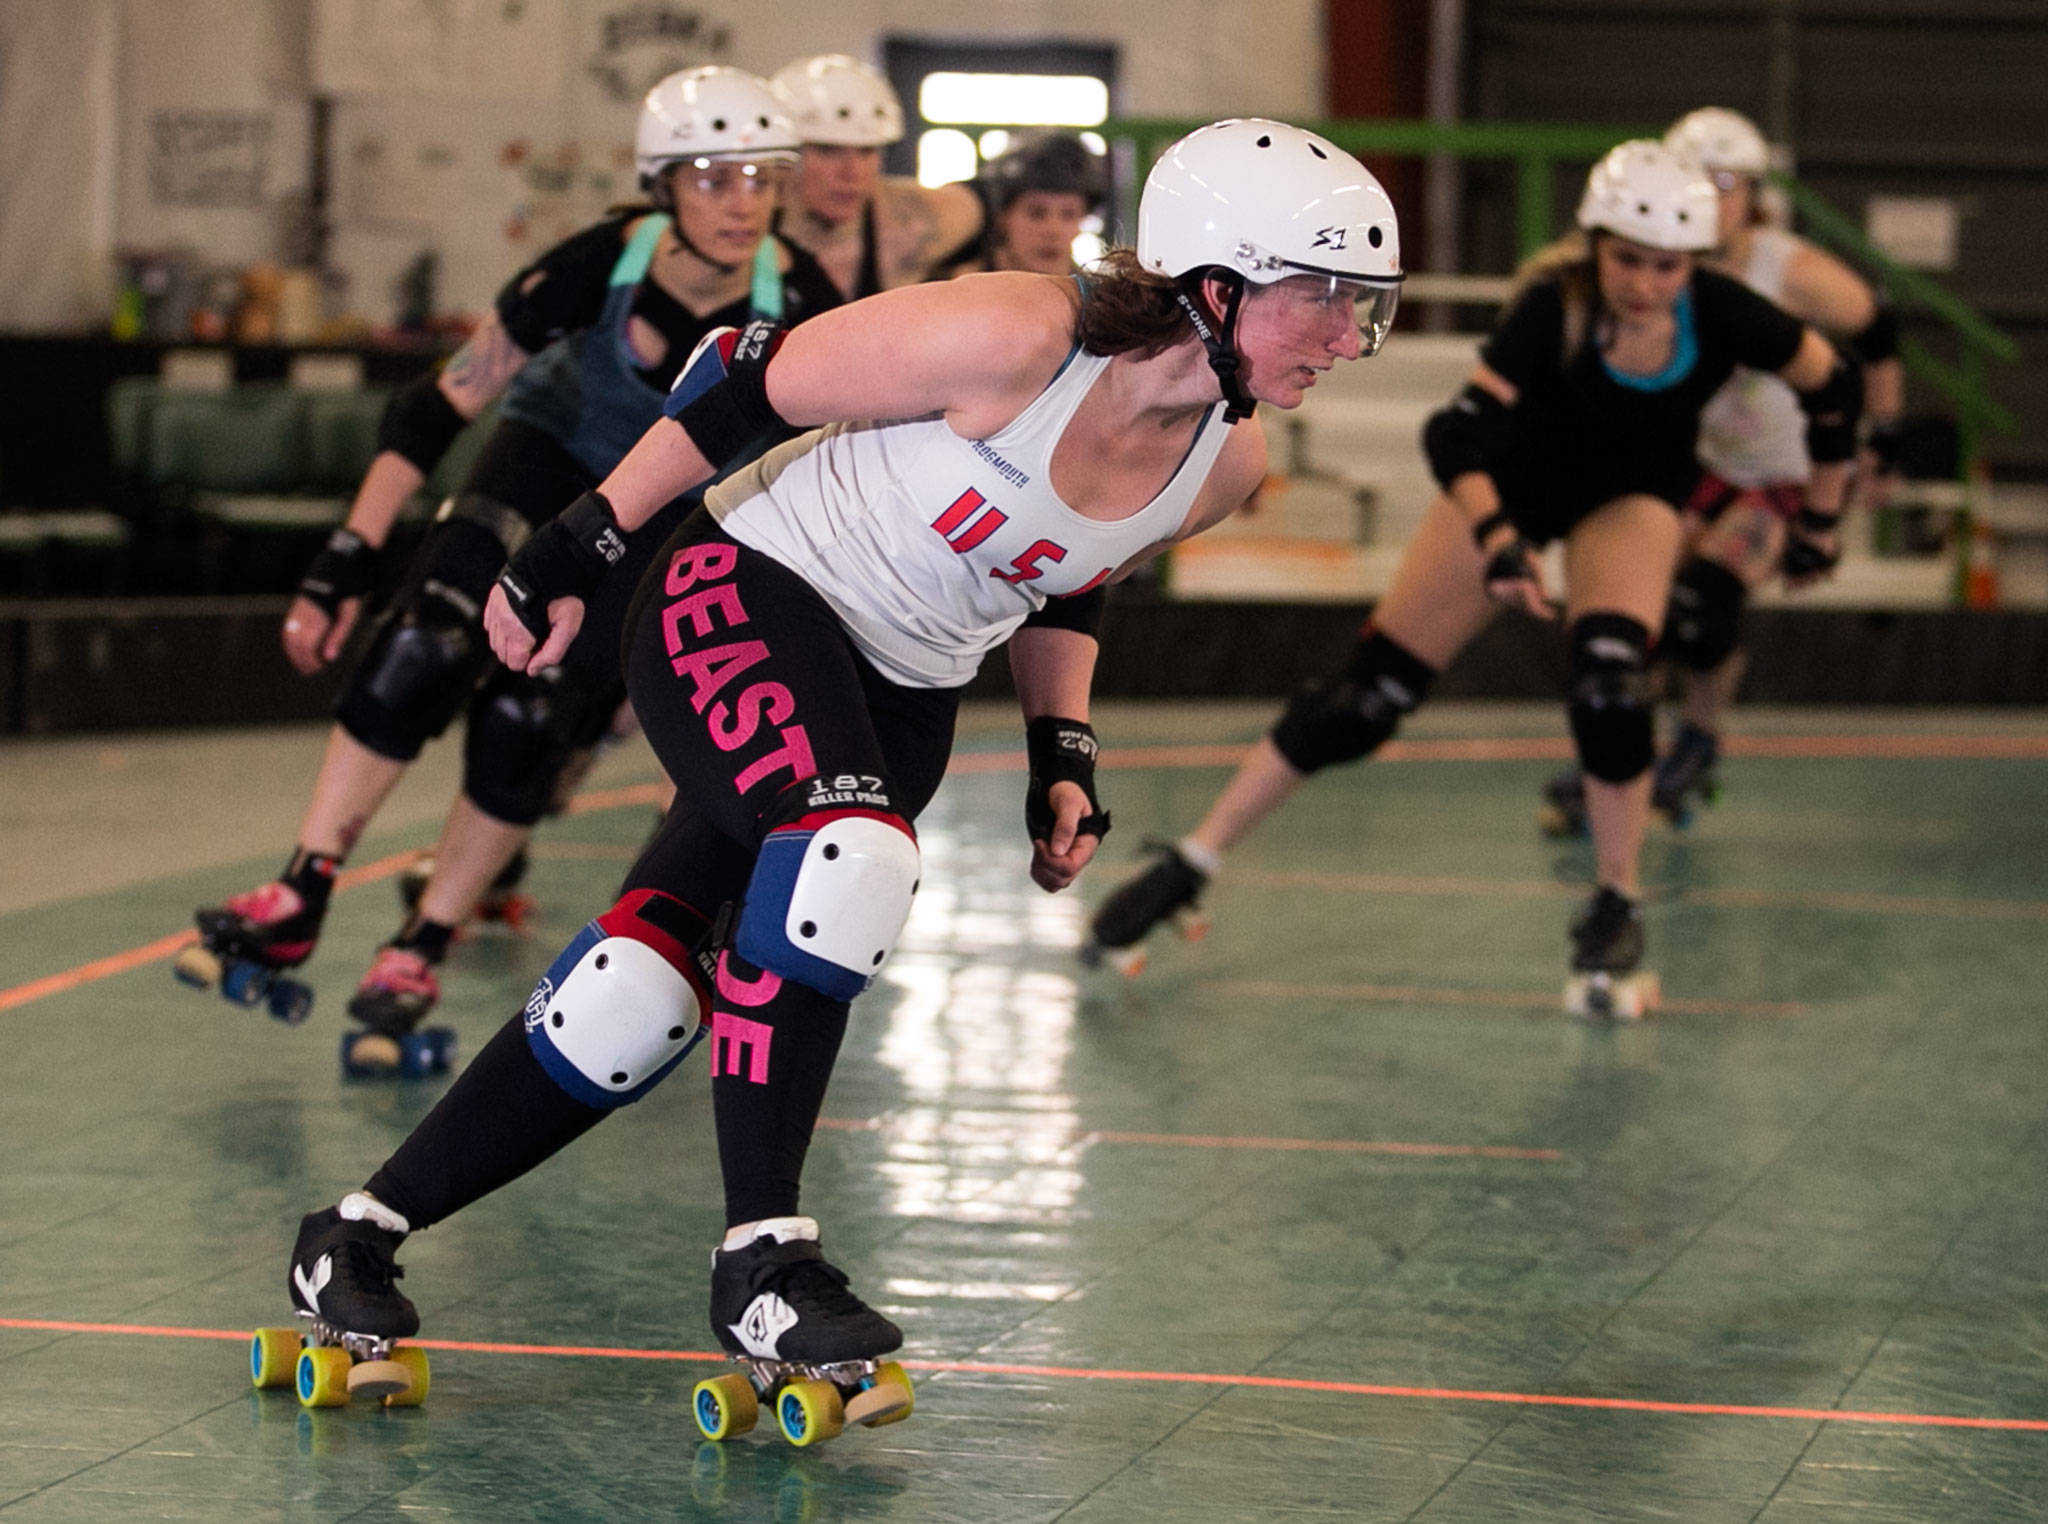 Lacey Ramon skates laps around the rink during Rat City Roller Girls practice Sunday in Shoreline. Ramon helped the United States win the gold medal at the World Cup earlier this month. (Kevin Clark / The Herald)